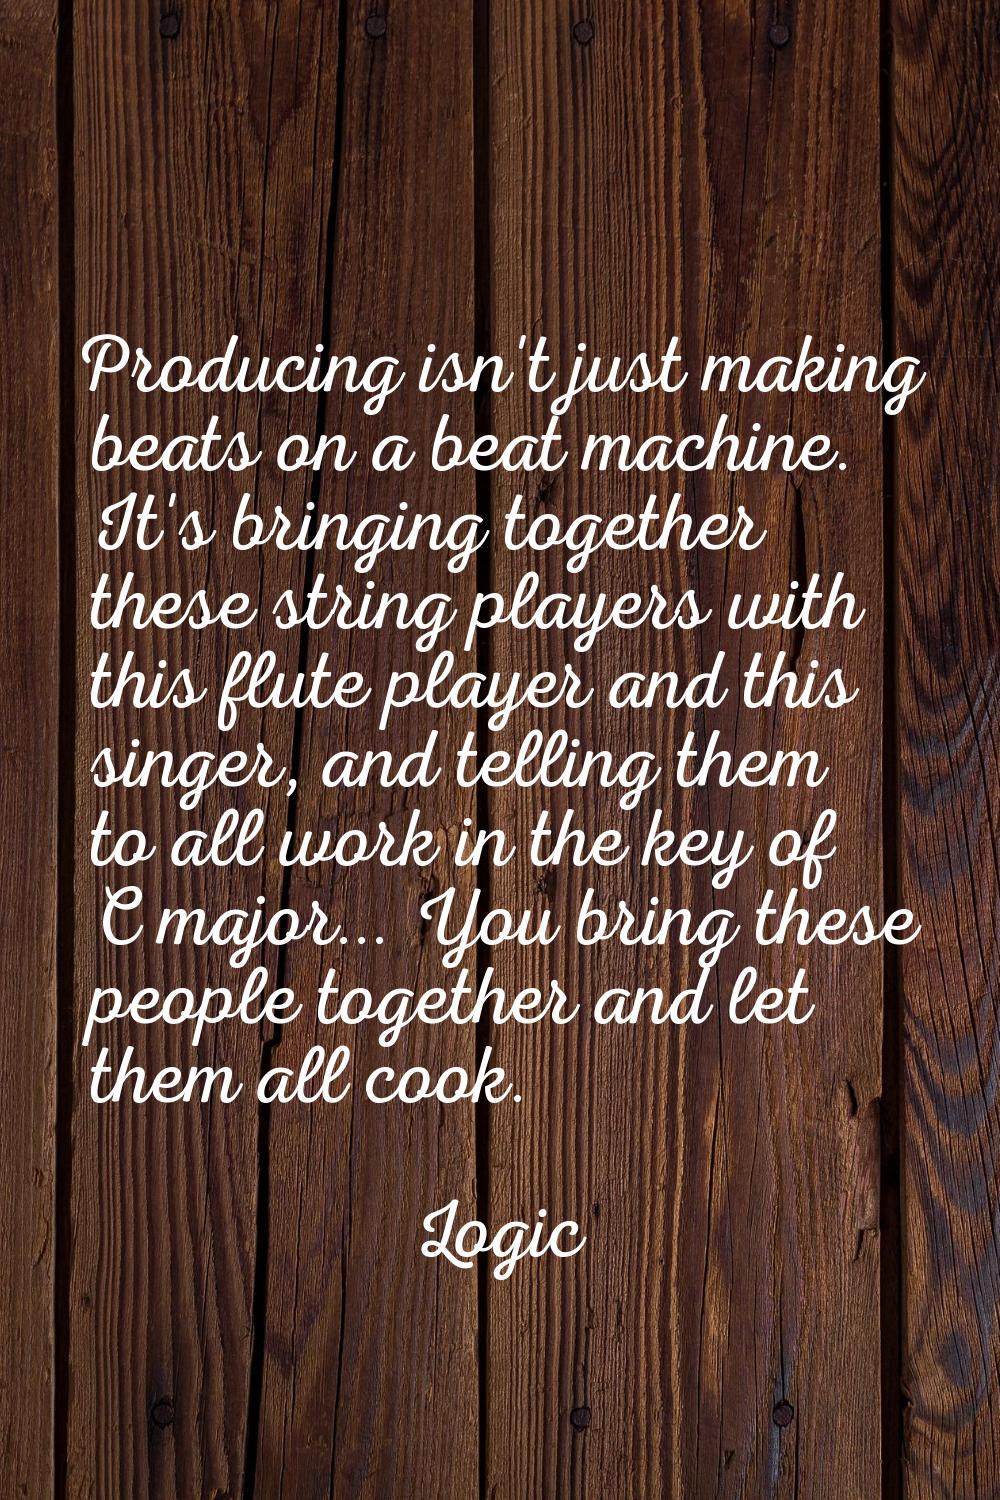 Producing isn't just making beats on a beat machine. It's bringing together these string players wi